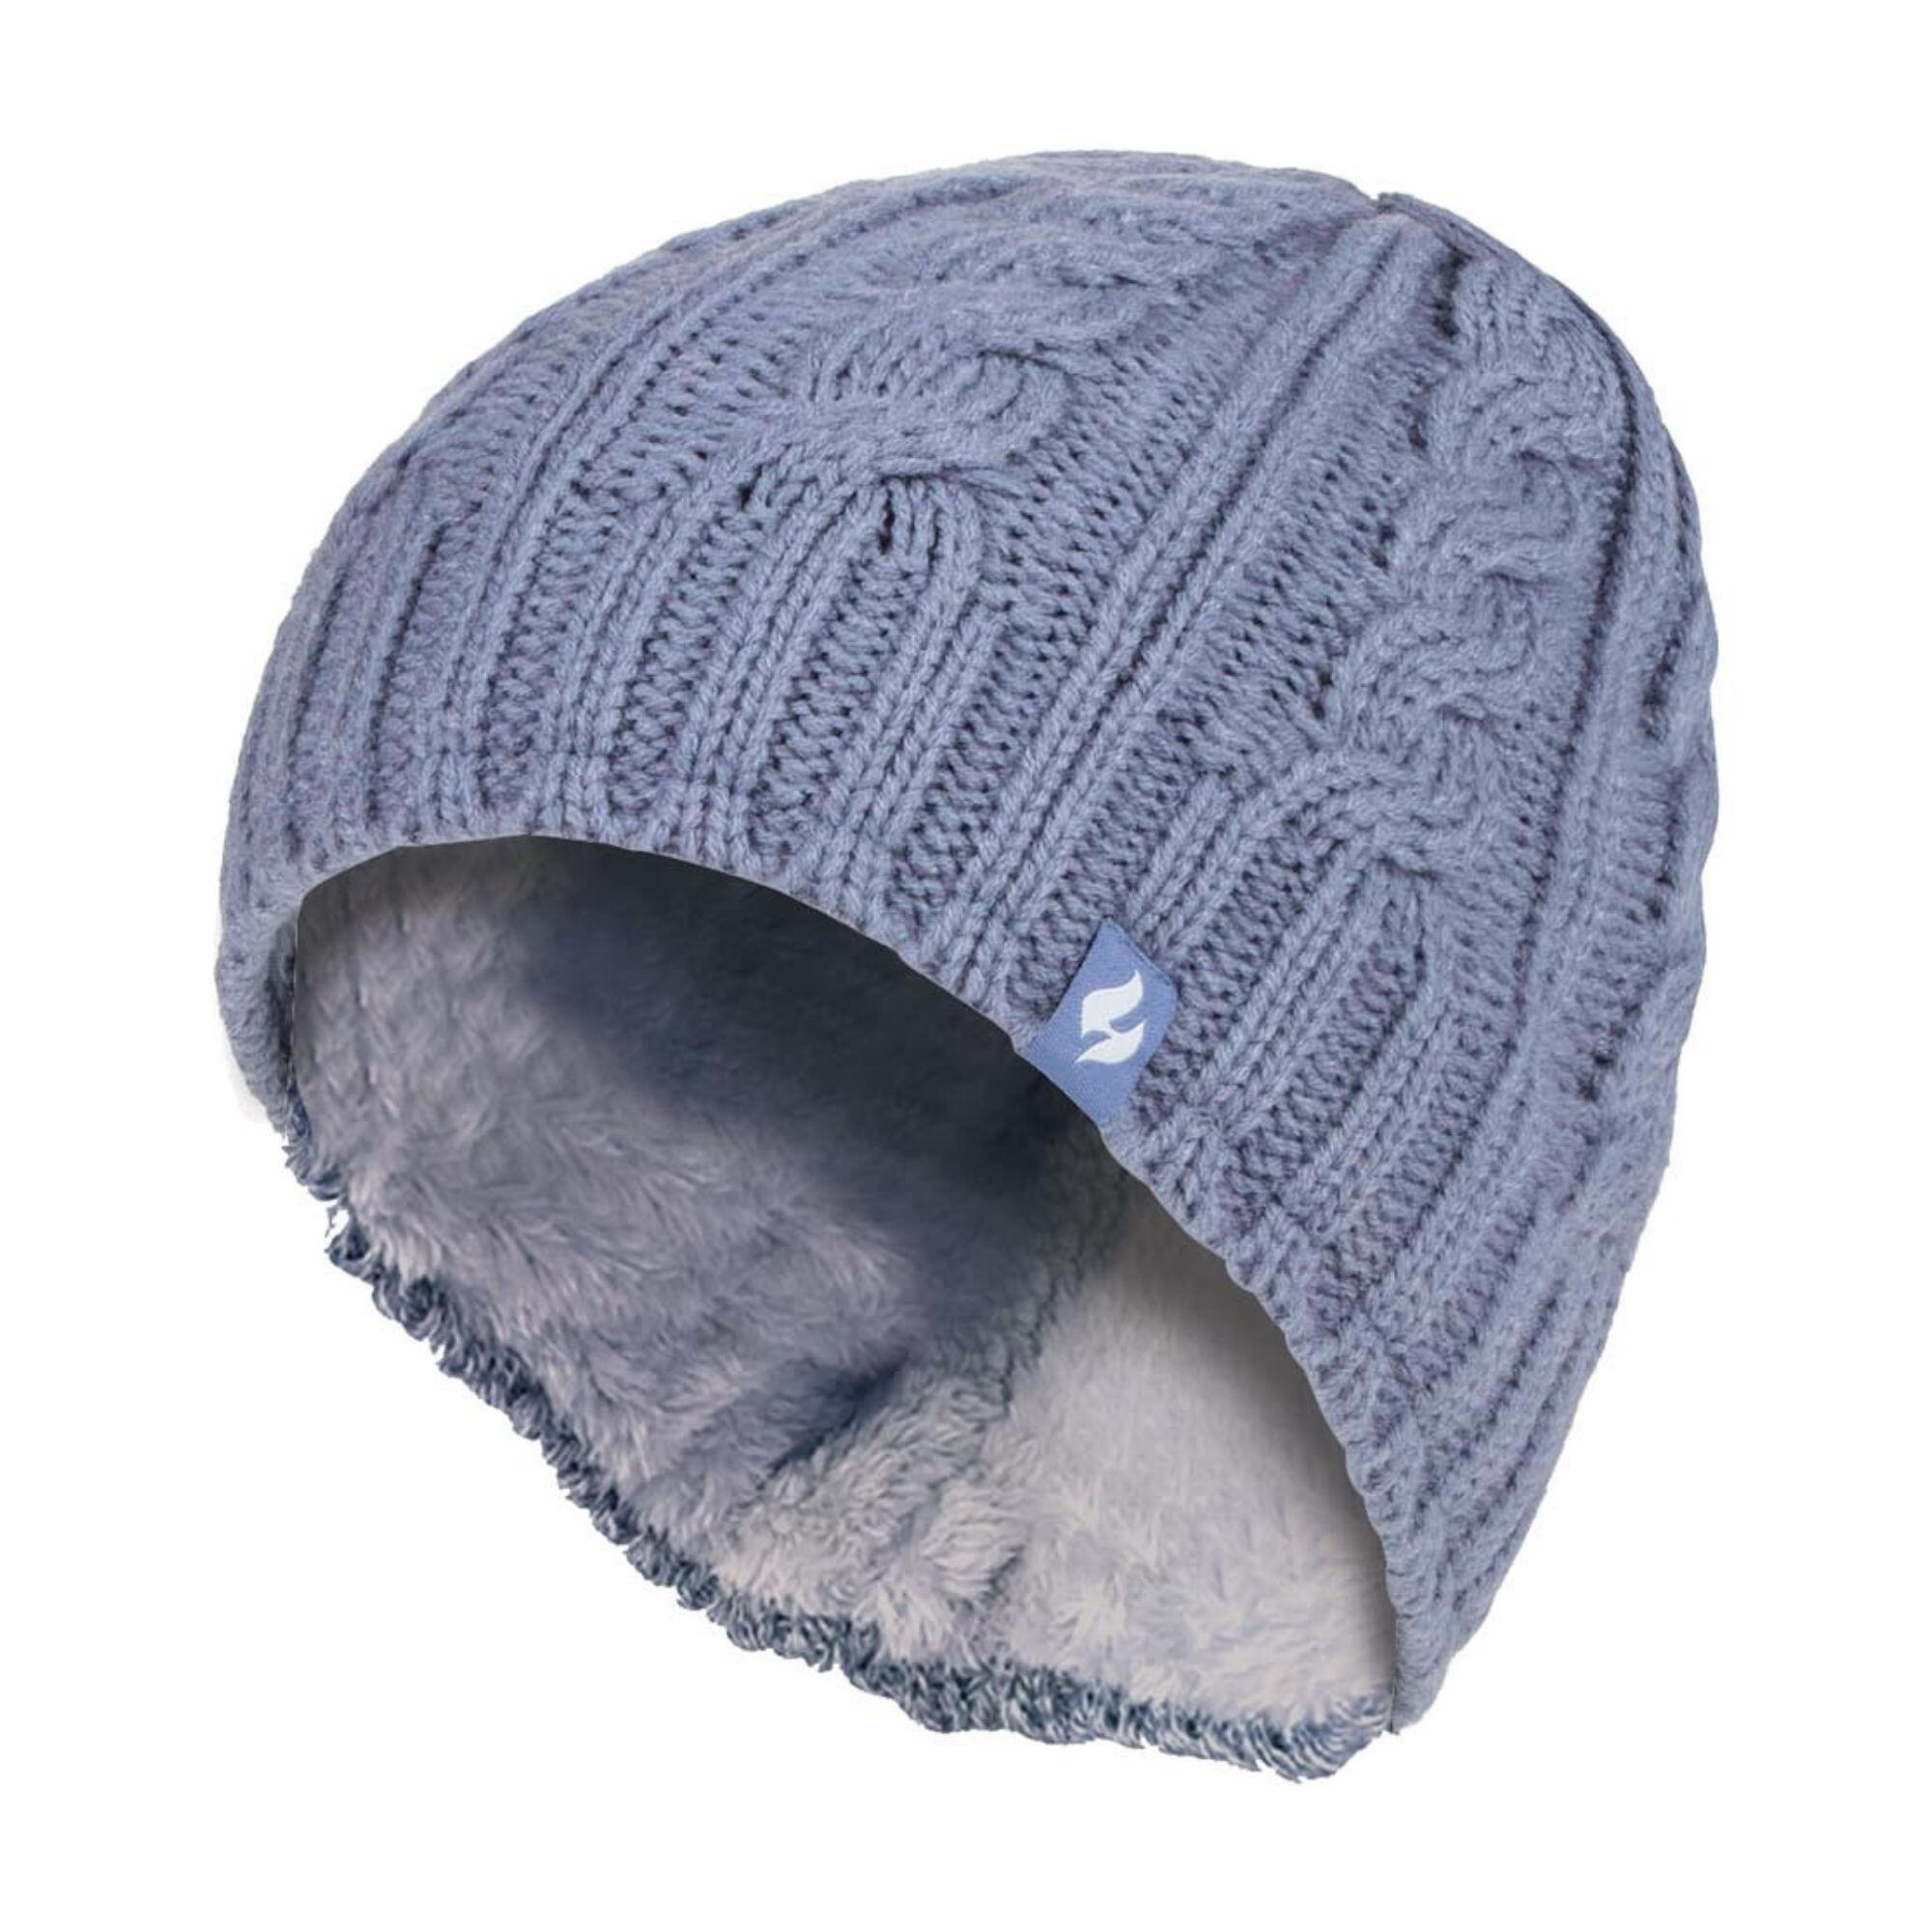 HEAT HOLDERS Ladies Cable Knit Fleece Lined 3.4 TOG Thermal Winter Hat